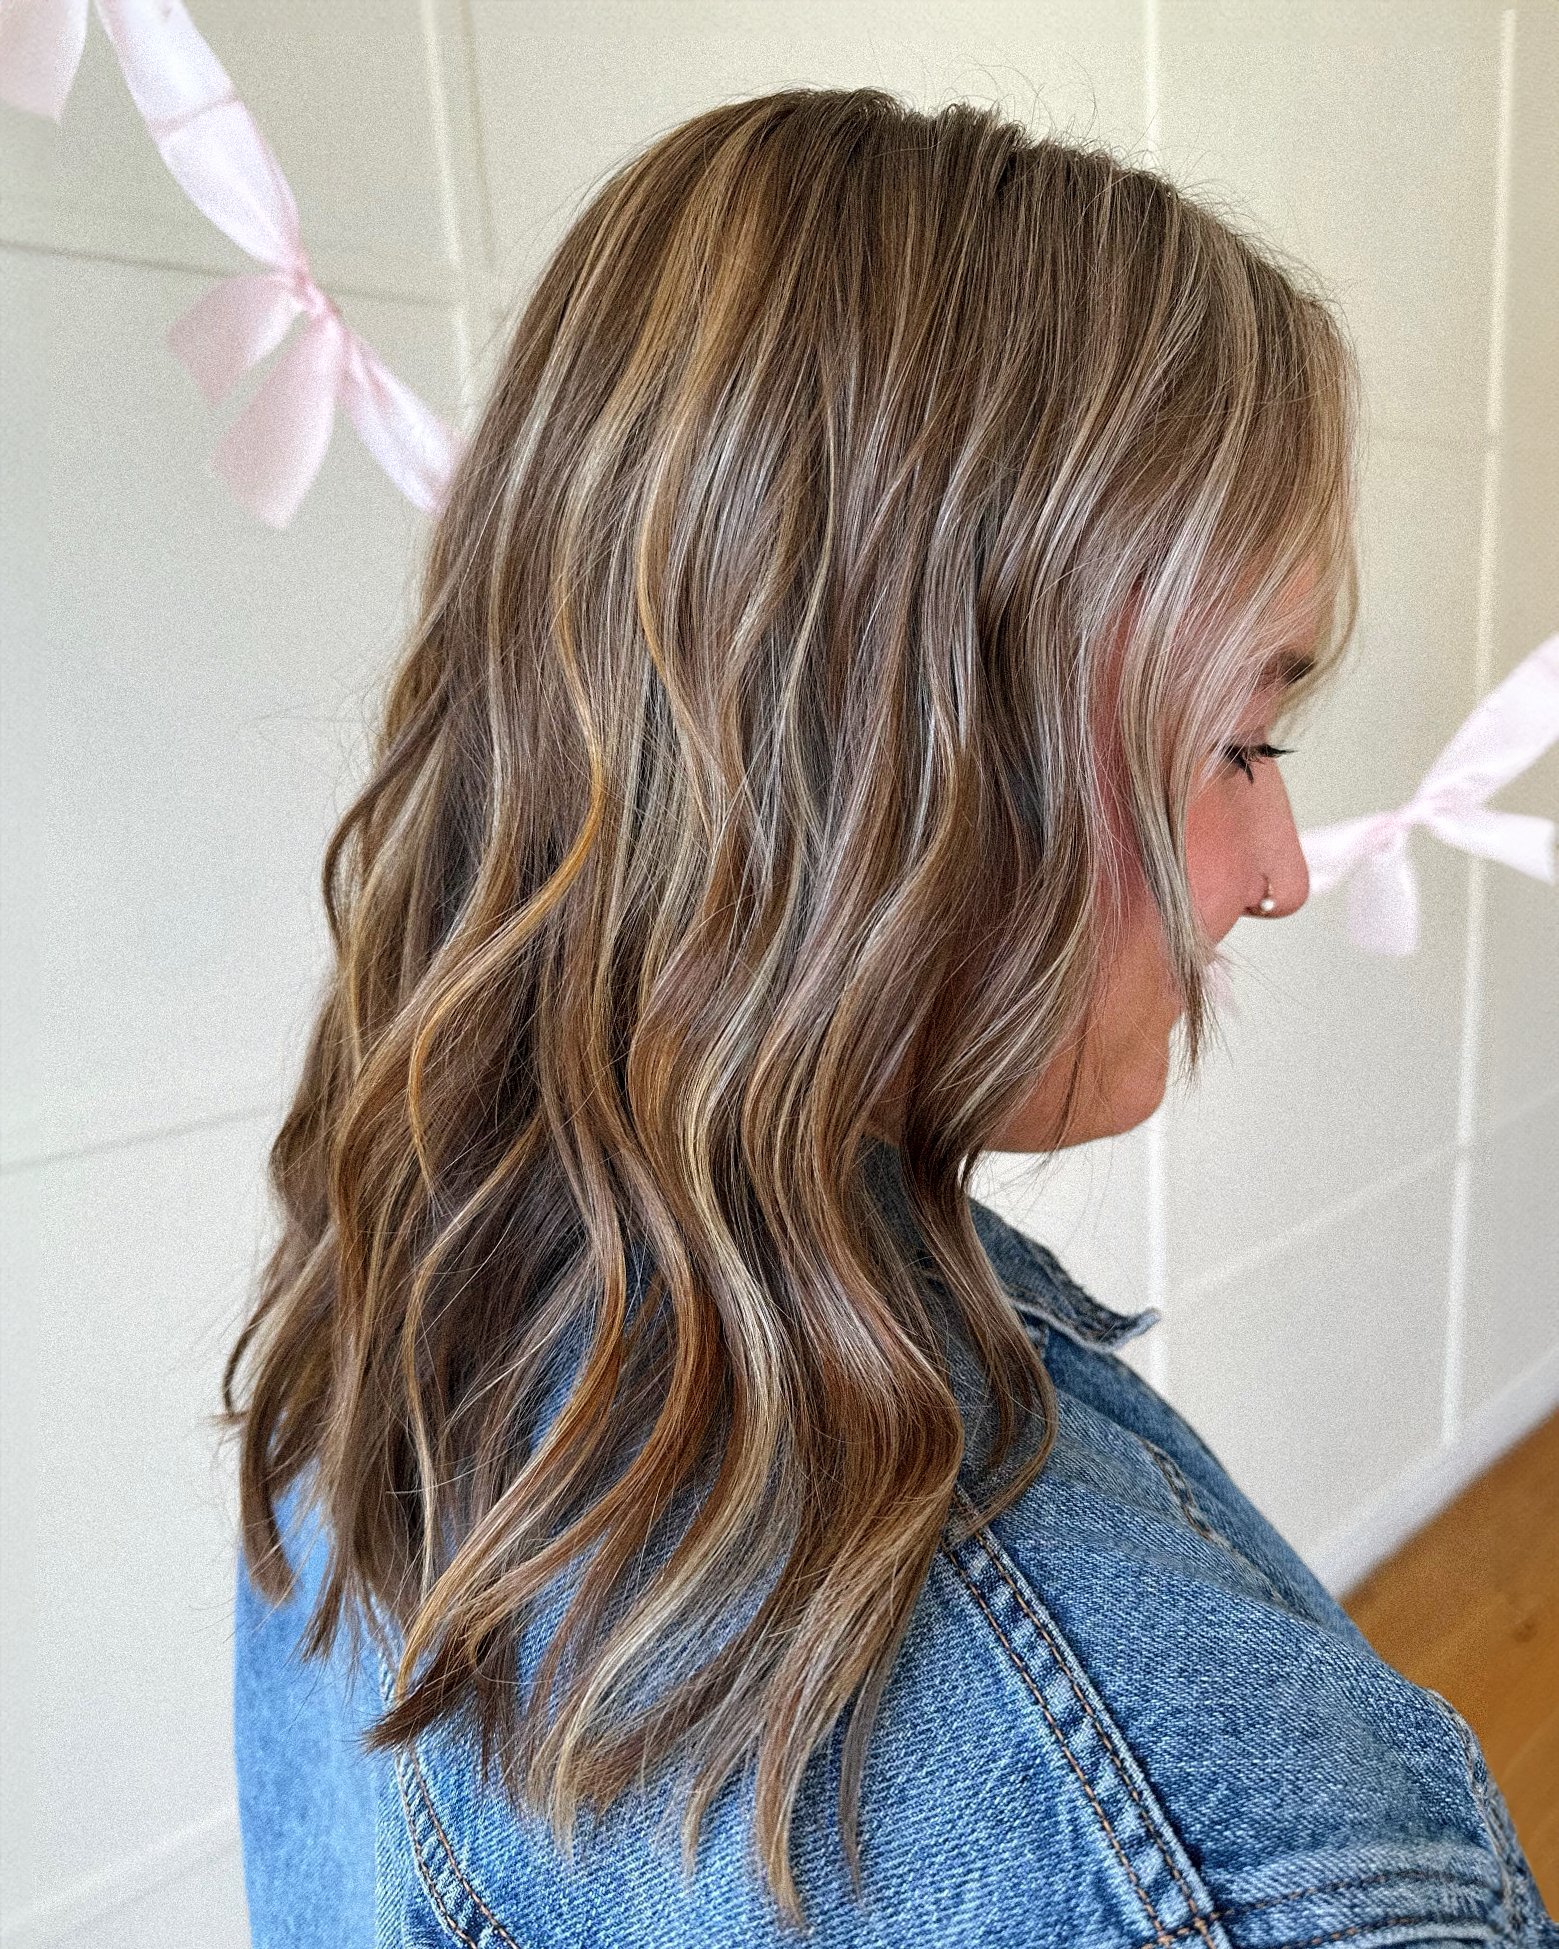 partial highlight for olivia ✨

by shayla

root tapped with 6,0
toned with 12g 9,22, 13g 9,0, 5g 10,23

#davinesview #davinesformula #partialhighlight #hihoneysalon #bismarcknd